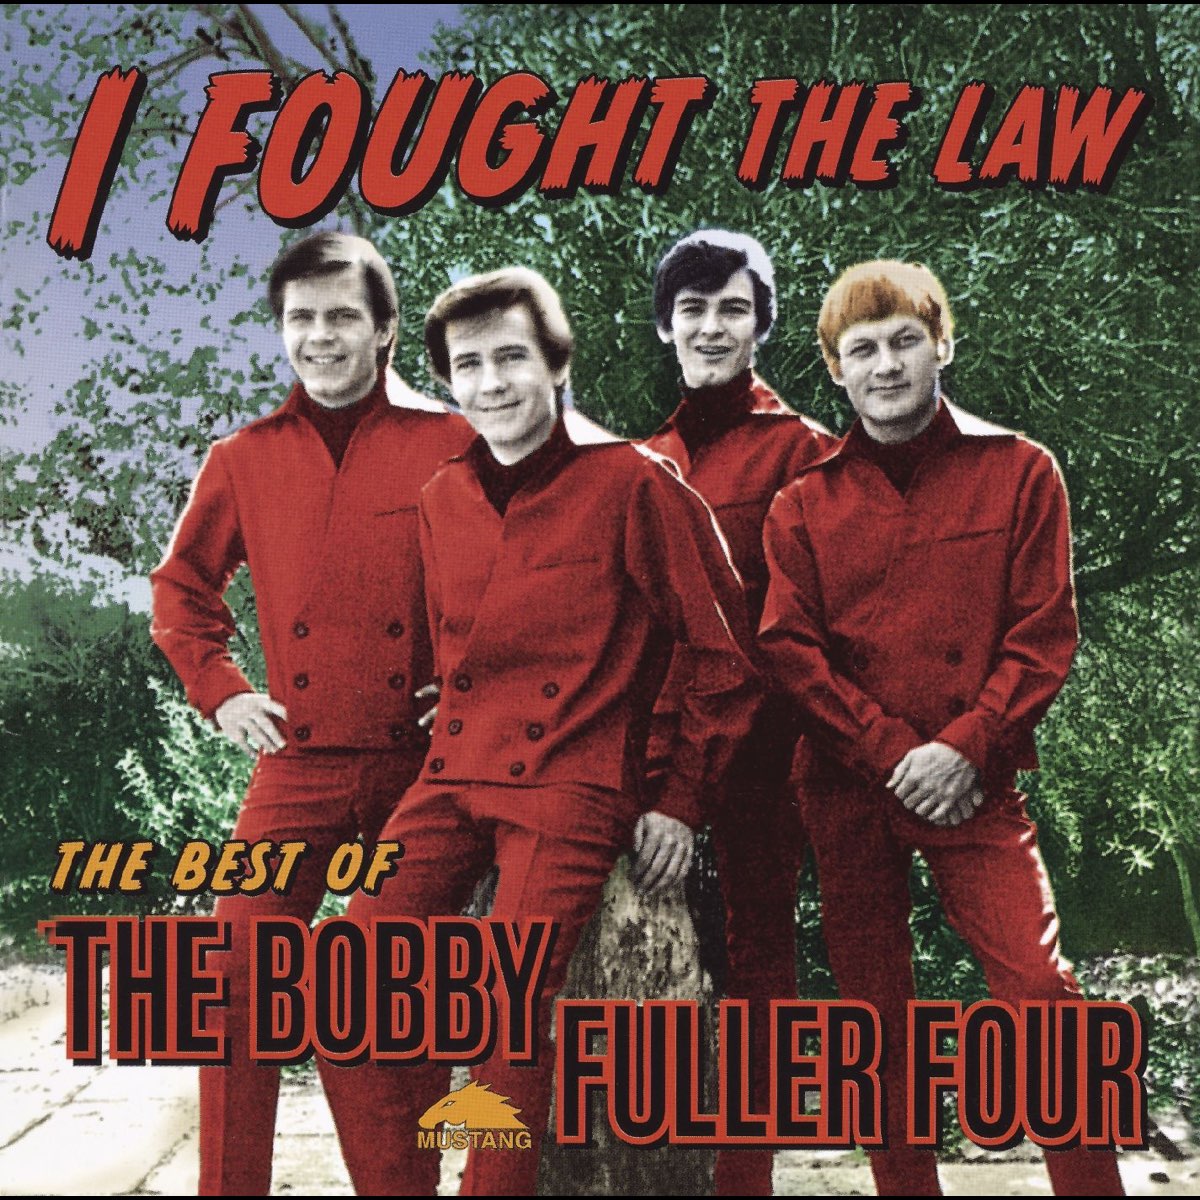 ‎i Fought The Law The Best Of The Bobby Fuller Four Album By The Bobby Fuller Four Apple Music